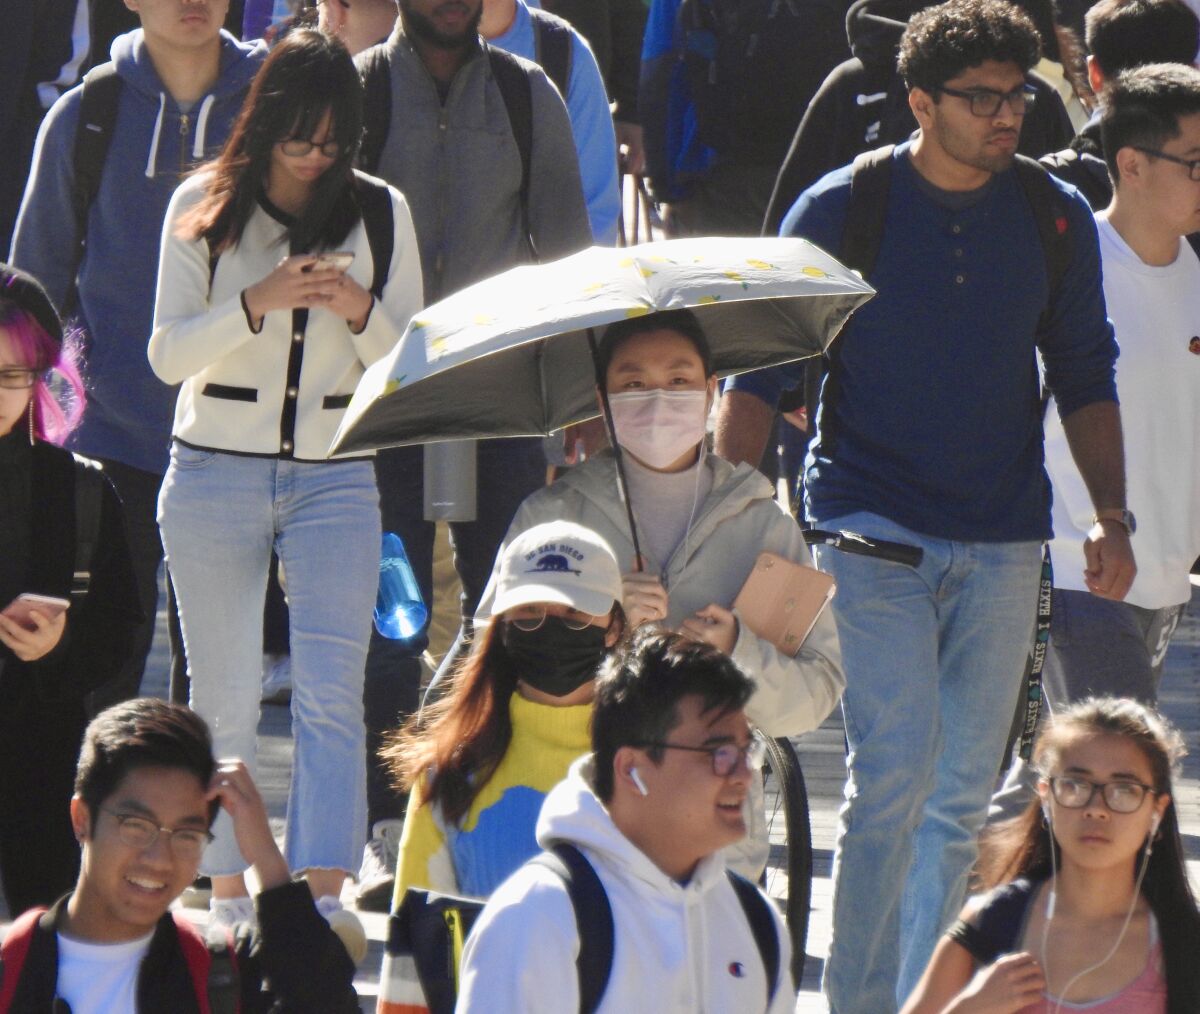 Despite decline in the number of foreign students, UCSD's overall enrollment declined last year.